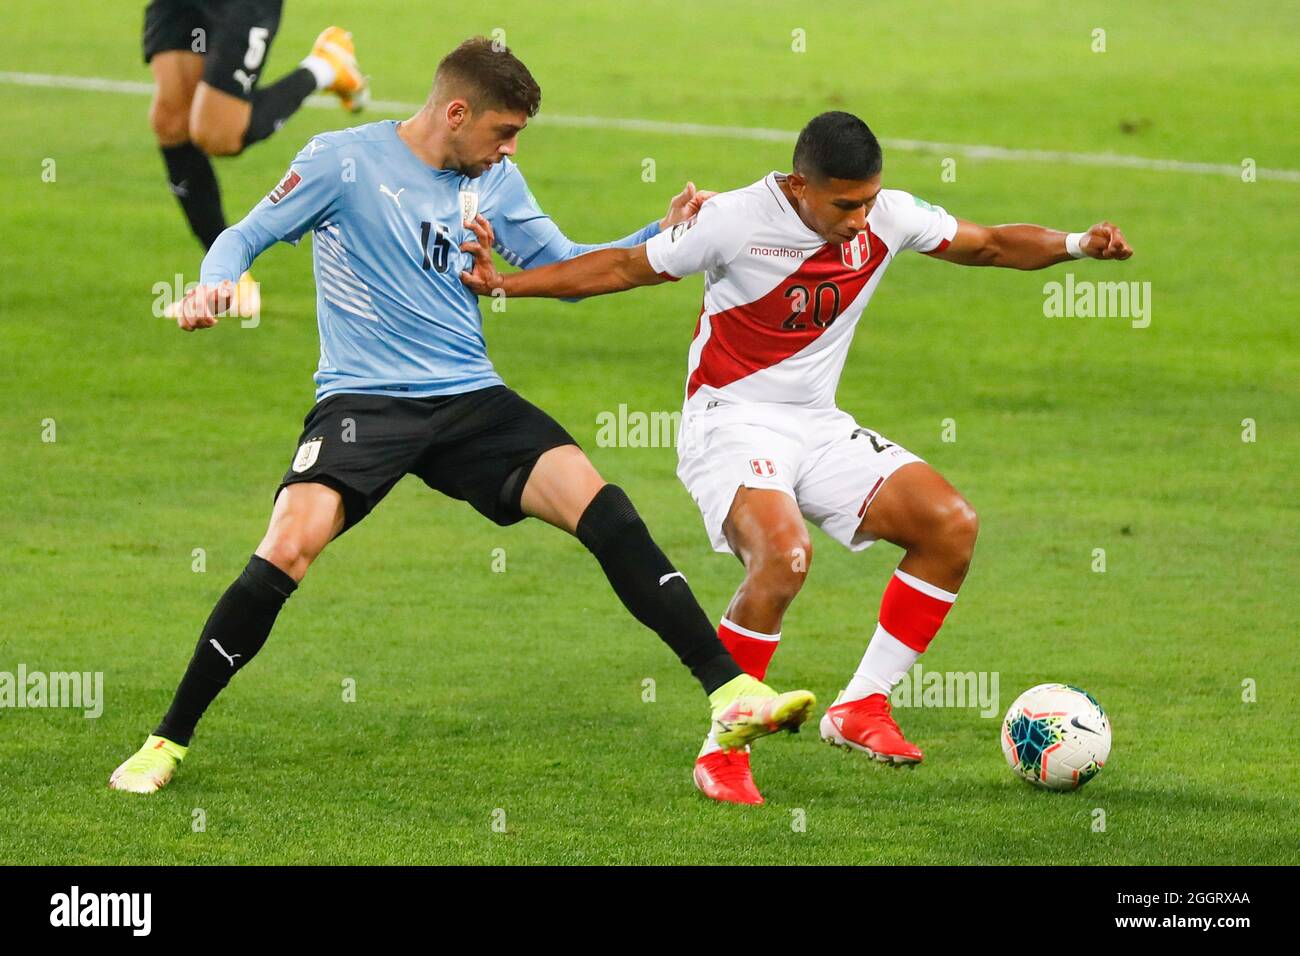 Lima, Peru. 02nd Sep, 2021. Federico Valverde and Edison Flores during a match between Peru and Uruguay played at the Estádio Nacional del Peru, in Lima, Peru. Game valid for the 9th round of the South American Qualifiers for the Qatar World Cup 2022. Credit: Ricardo Moreira/FotoArena/Alamy Live News Stock Photo